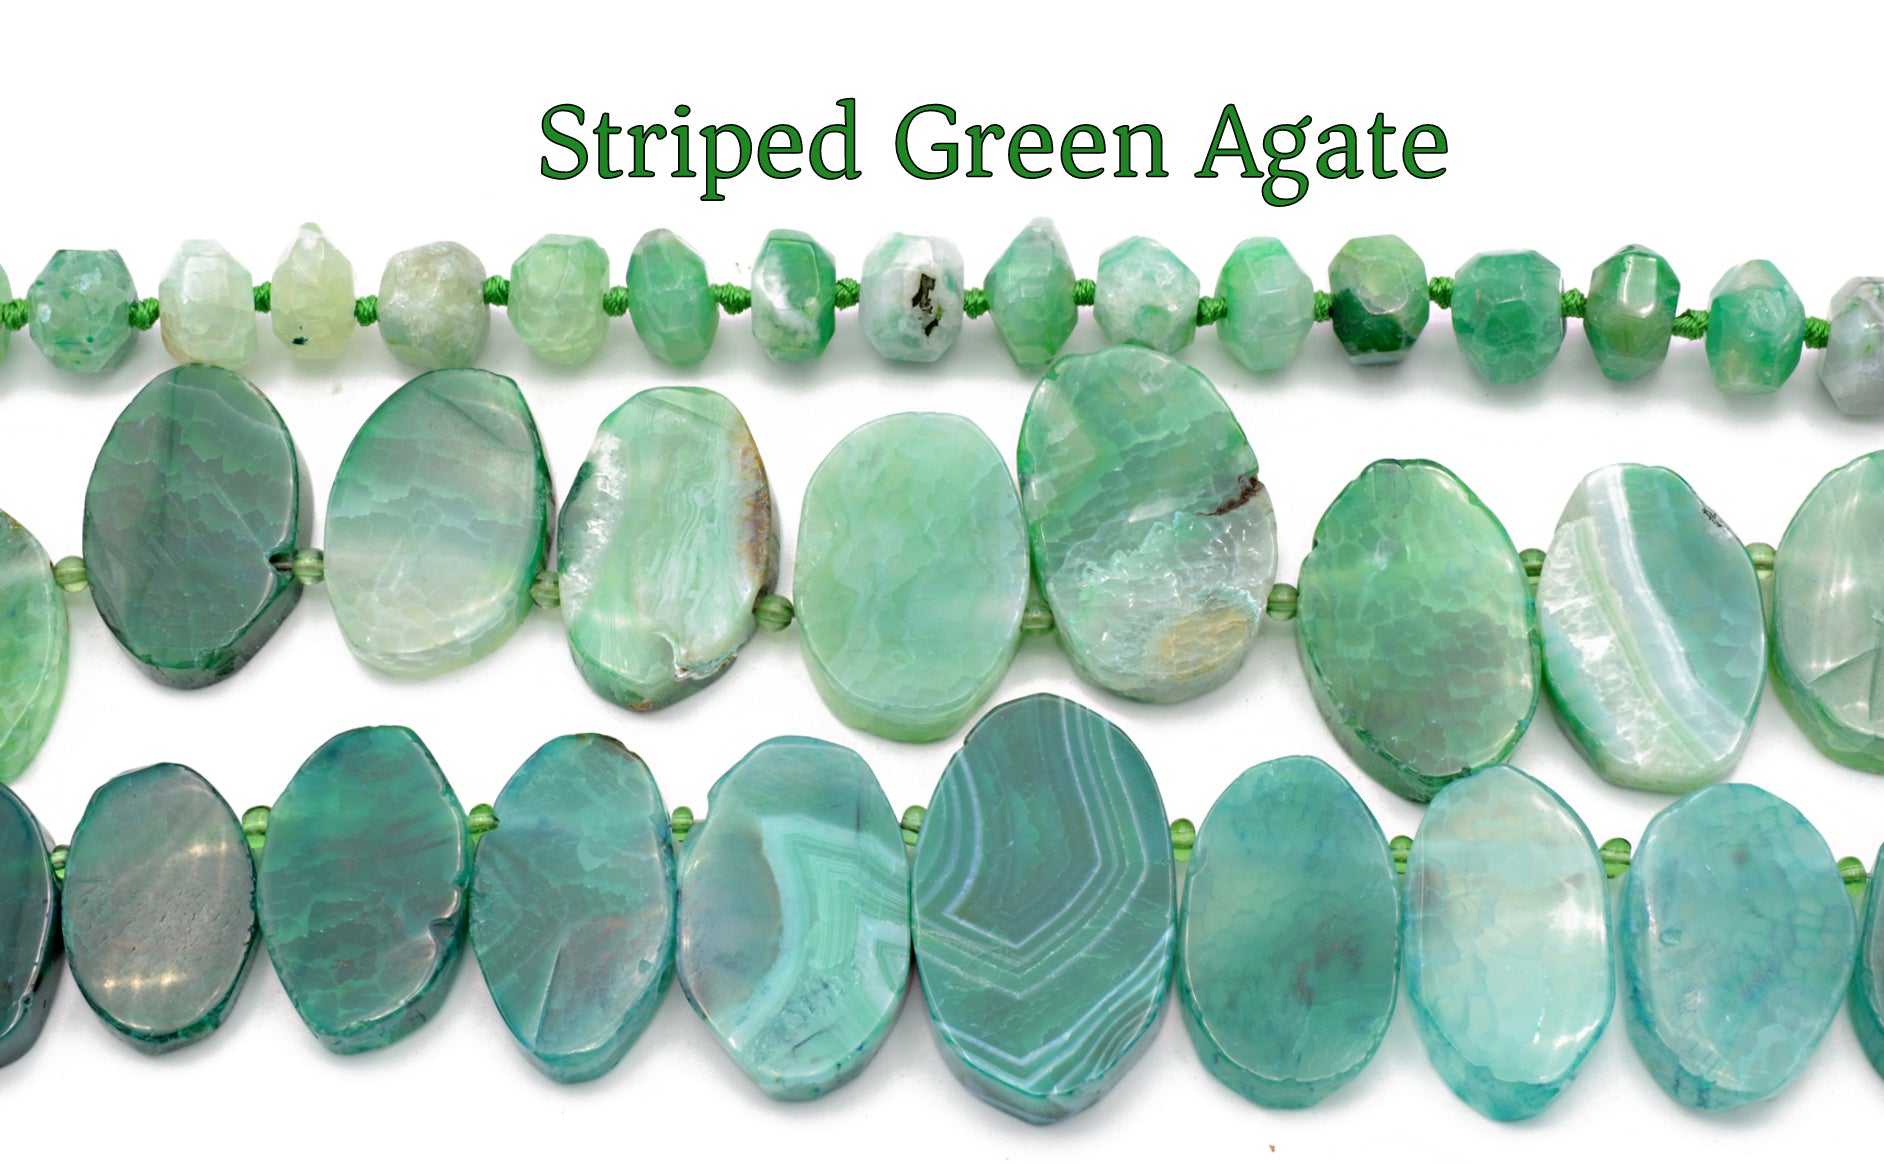 Striped Green Agate Oval and Faceted Roundel on Sale - BeadsFindingDepot